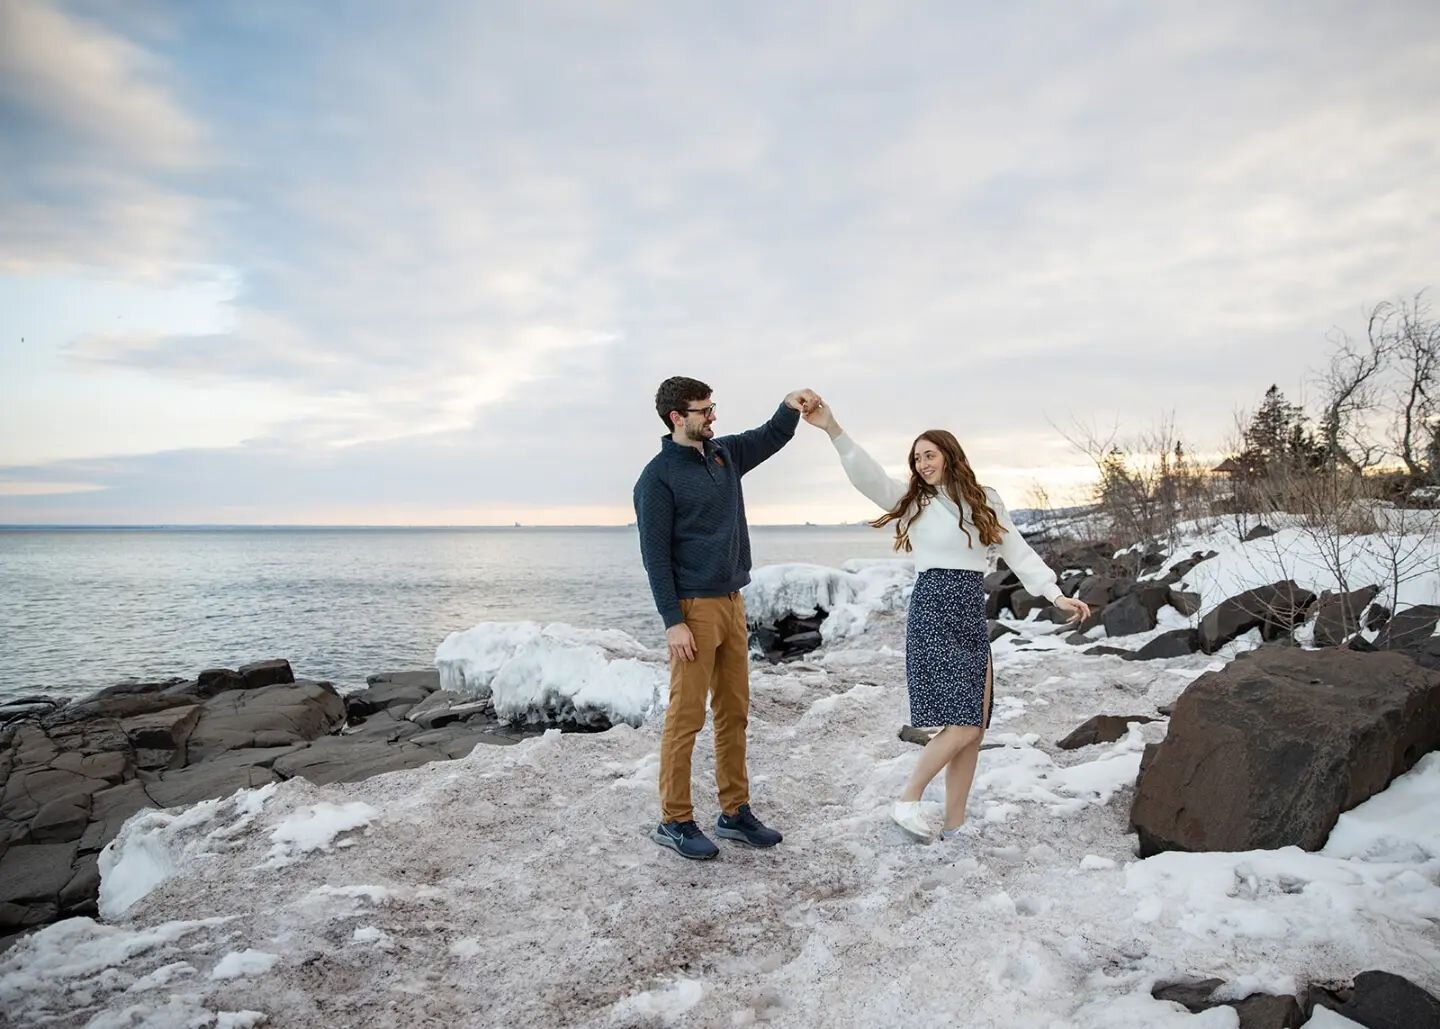 I got to see the northern lights for the FIRST TIME EVER because of photographing this awesome couple! We did their engagement session about a month ago, the day after the unforgettable, magical Aurora Borealis showed off for Duluth, MN. Not that's n